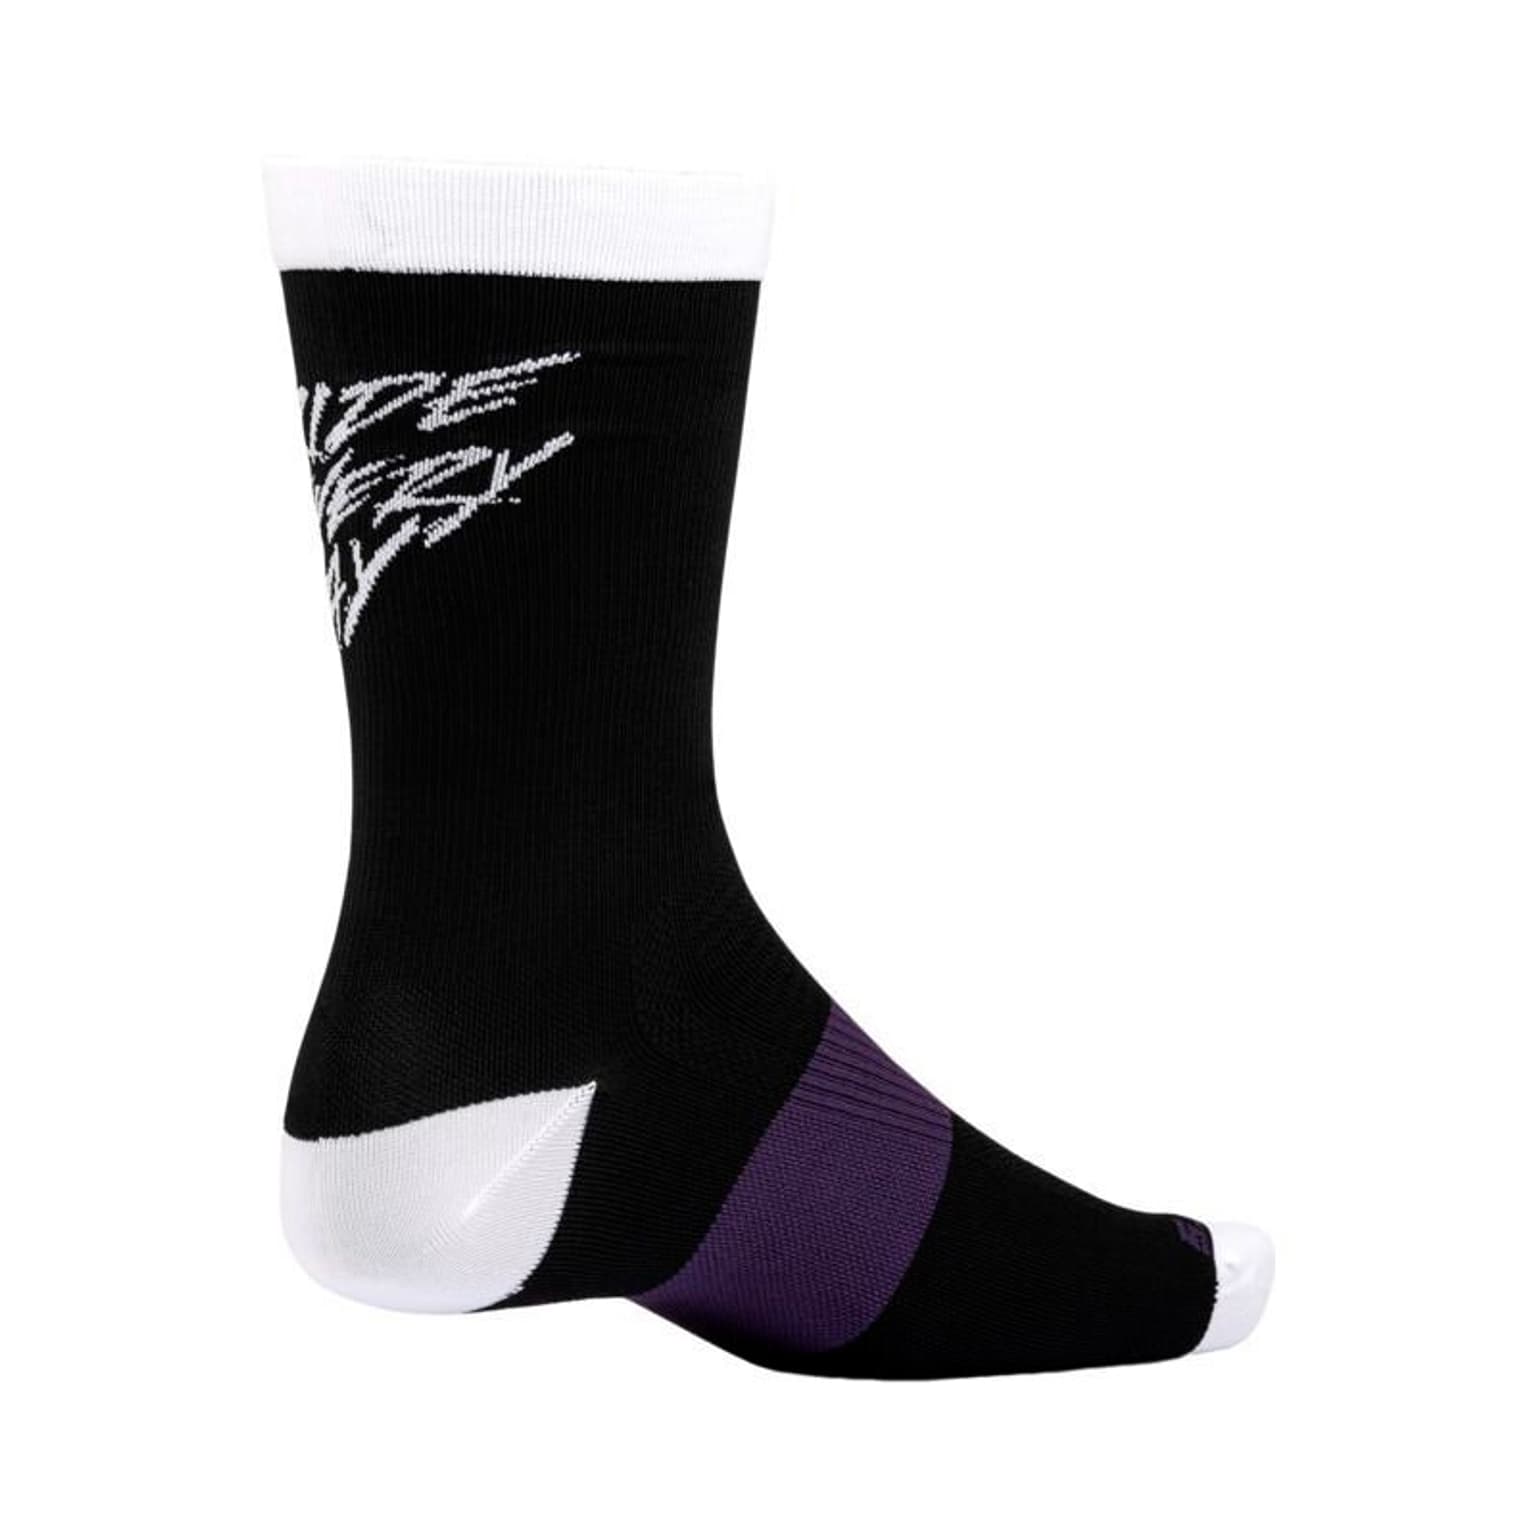 Ride Concepts Ride Concepts Ride Every Day Synthetic Velosocken weiss 1